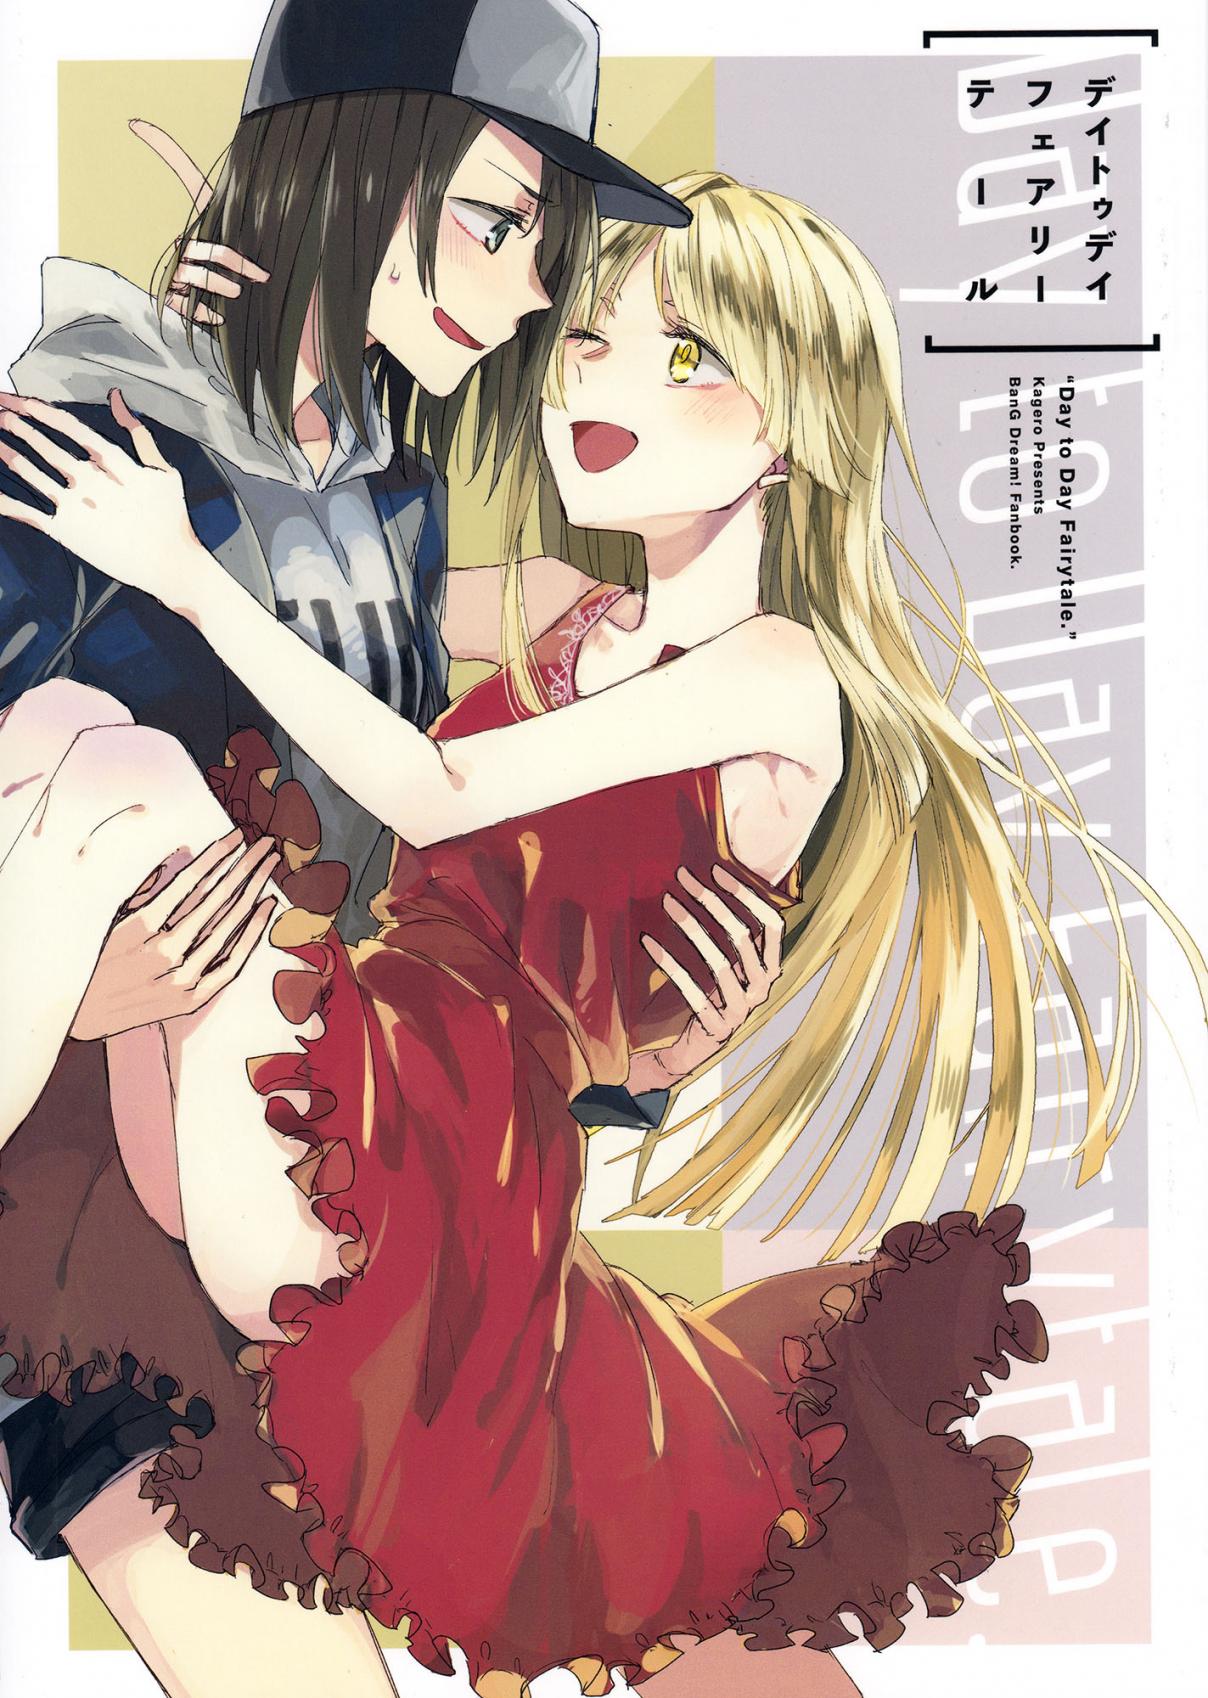 BanG Dream! Day to Day Fairy Tale (Doujinshi) Oneshot